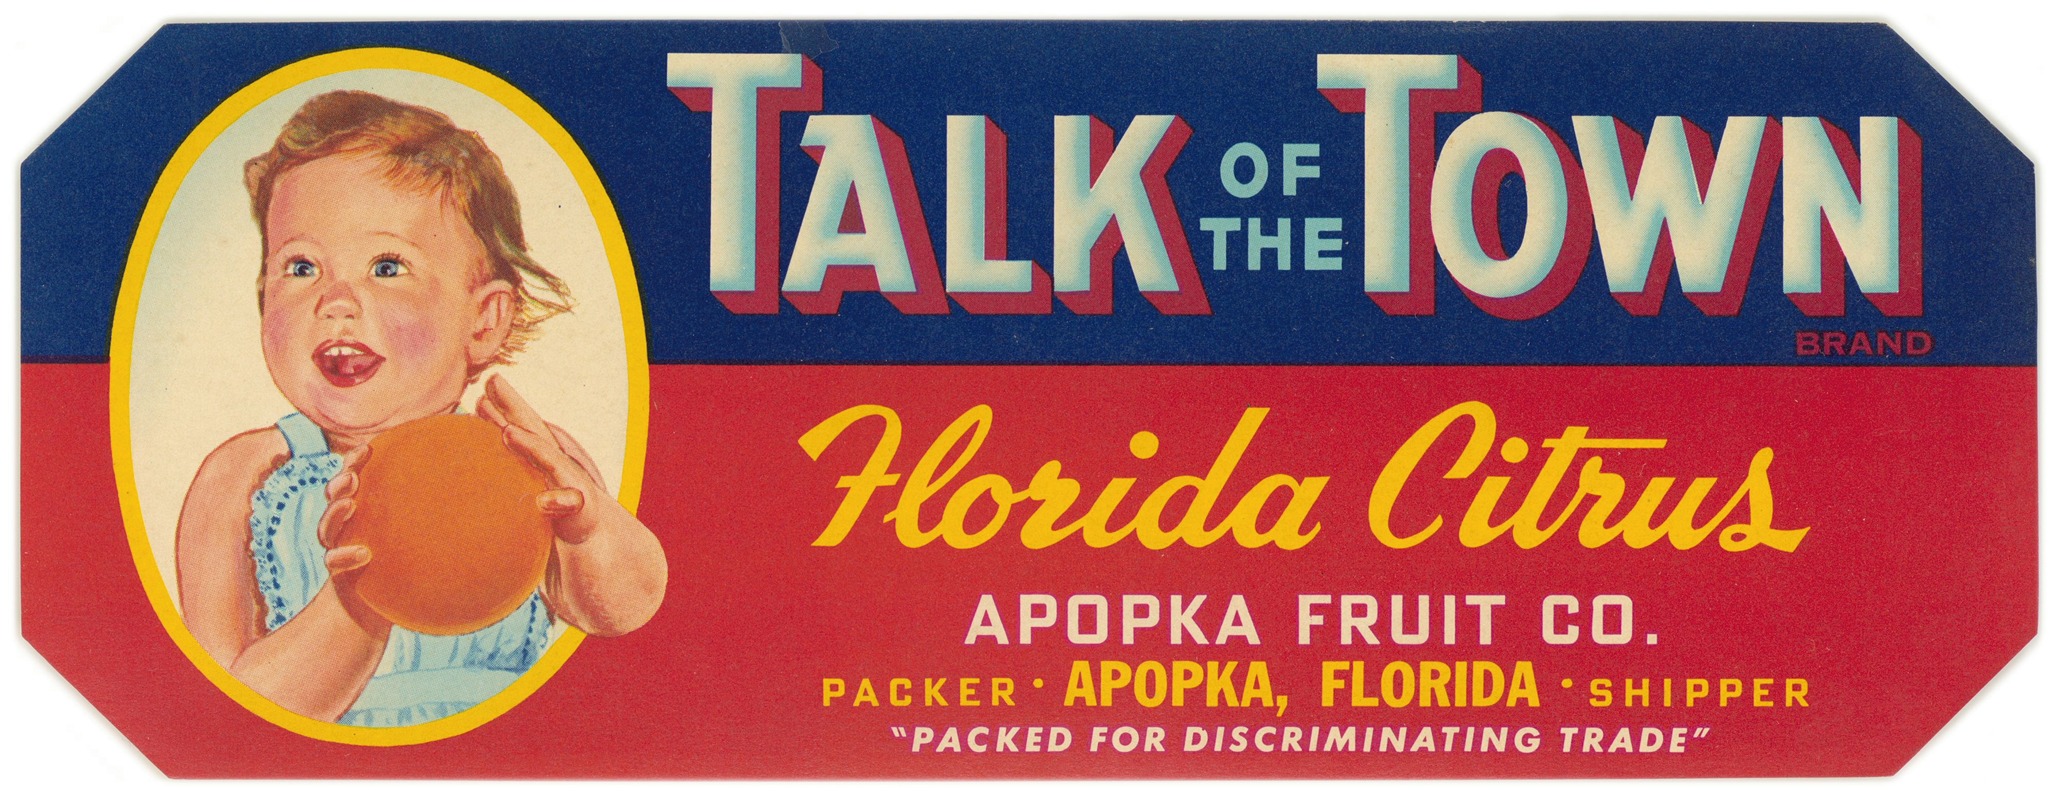 Anonymous - Talk of the Town Brand Florida Citrus Label